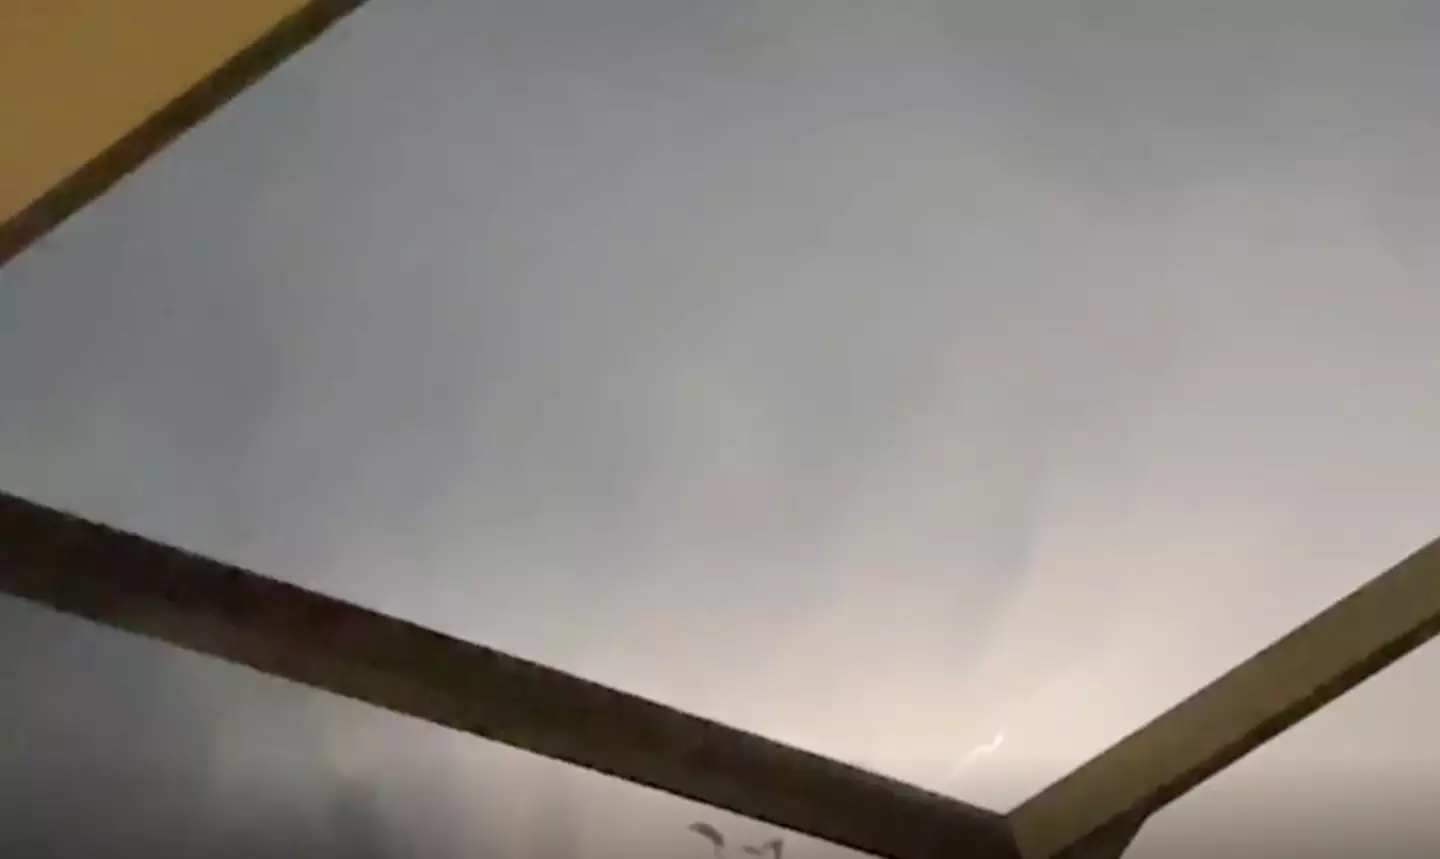 The Redditer explained it took a 'literal second' for the lightning to disappear.